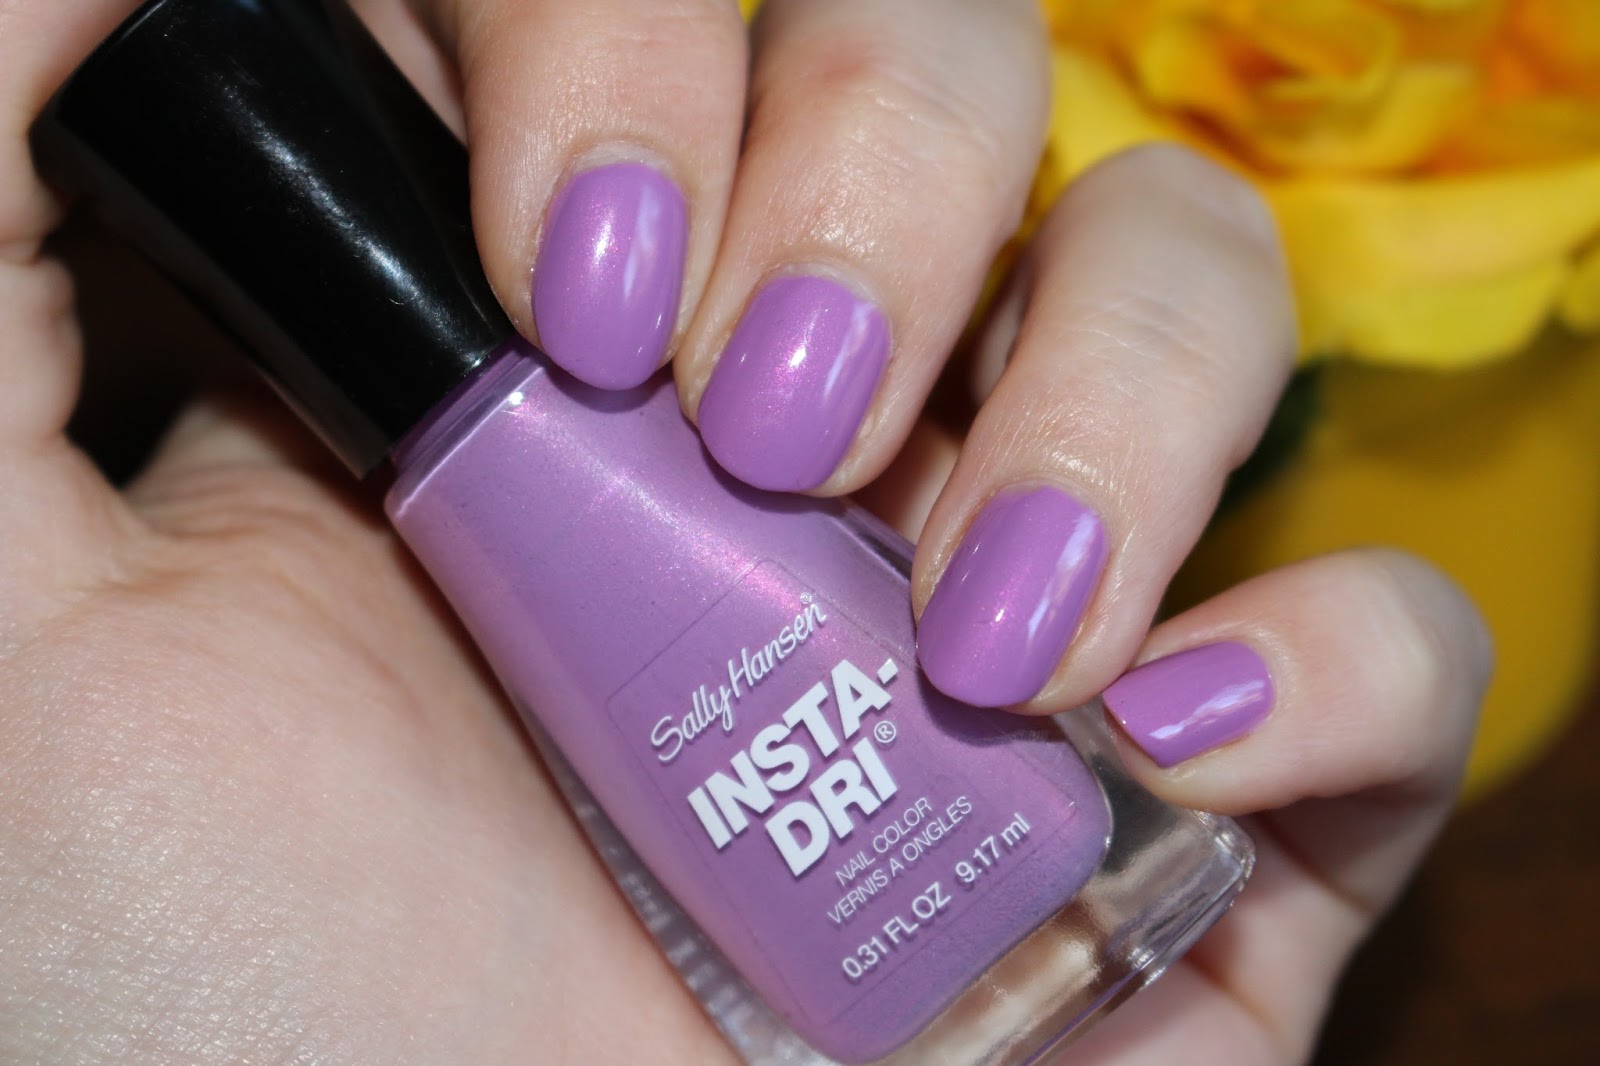 2. Get 20% off Sally Hansen Insta-Dri Nail Color with this printable coupon - wide 5